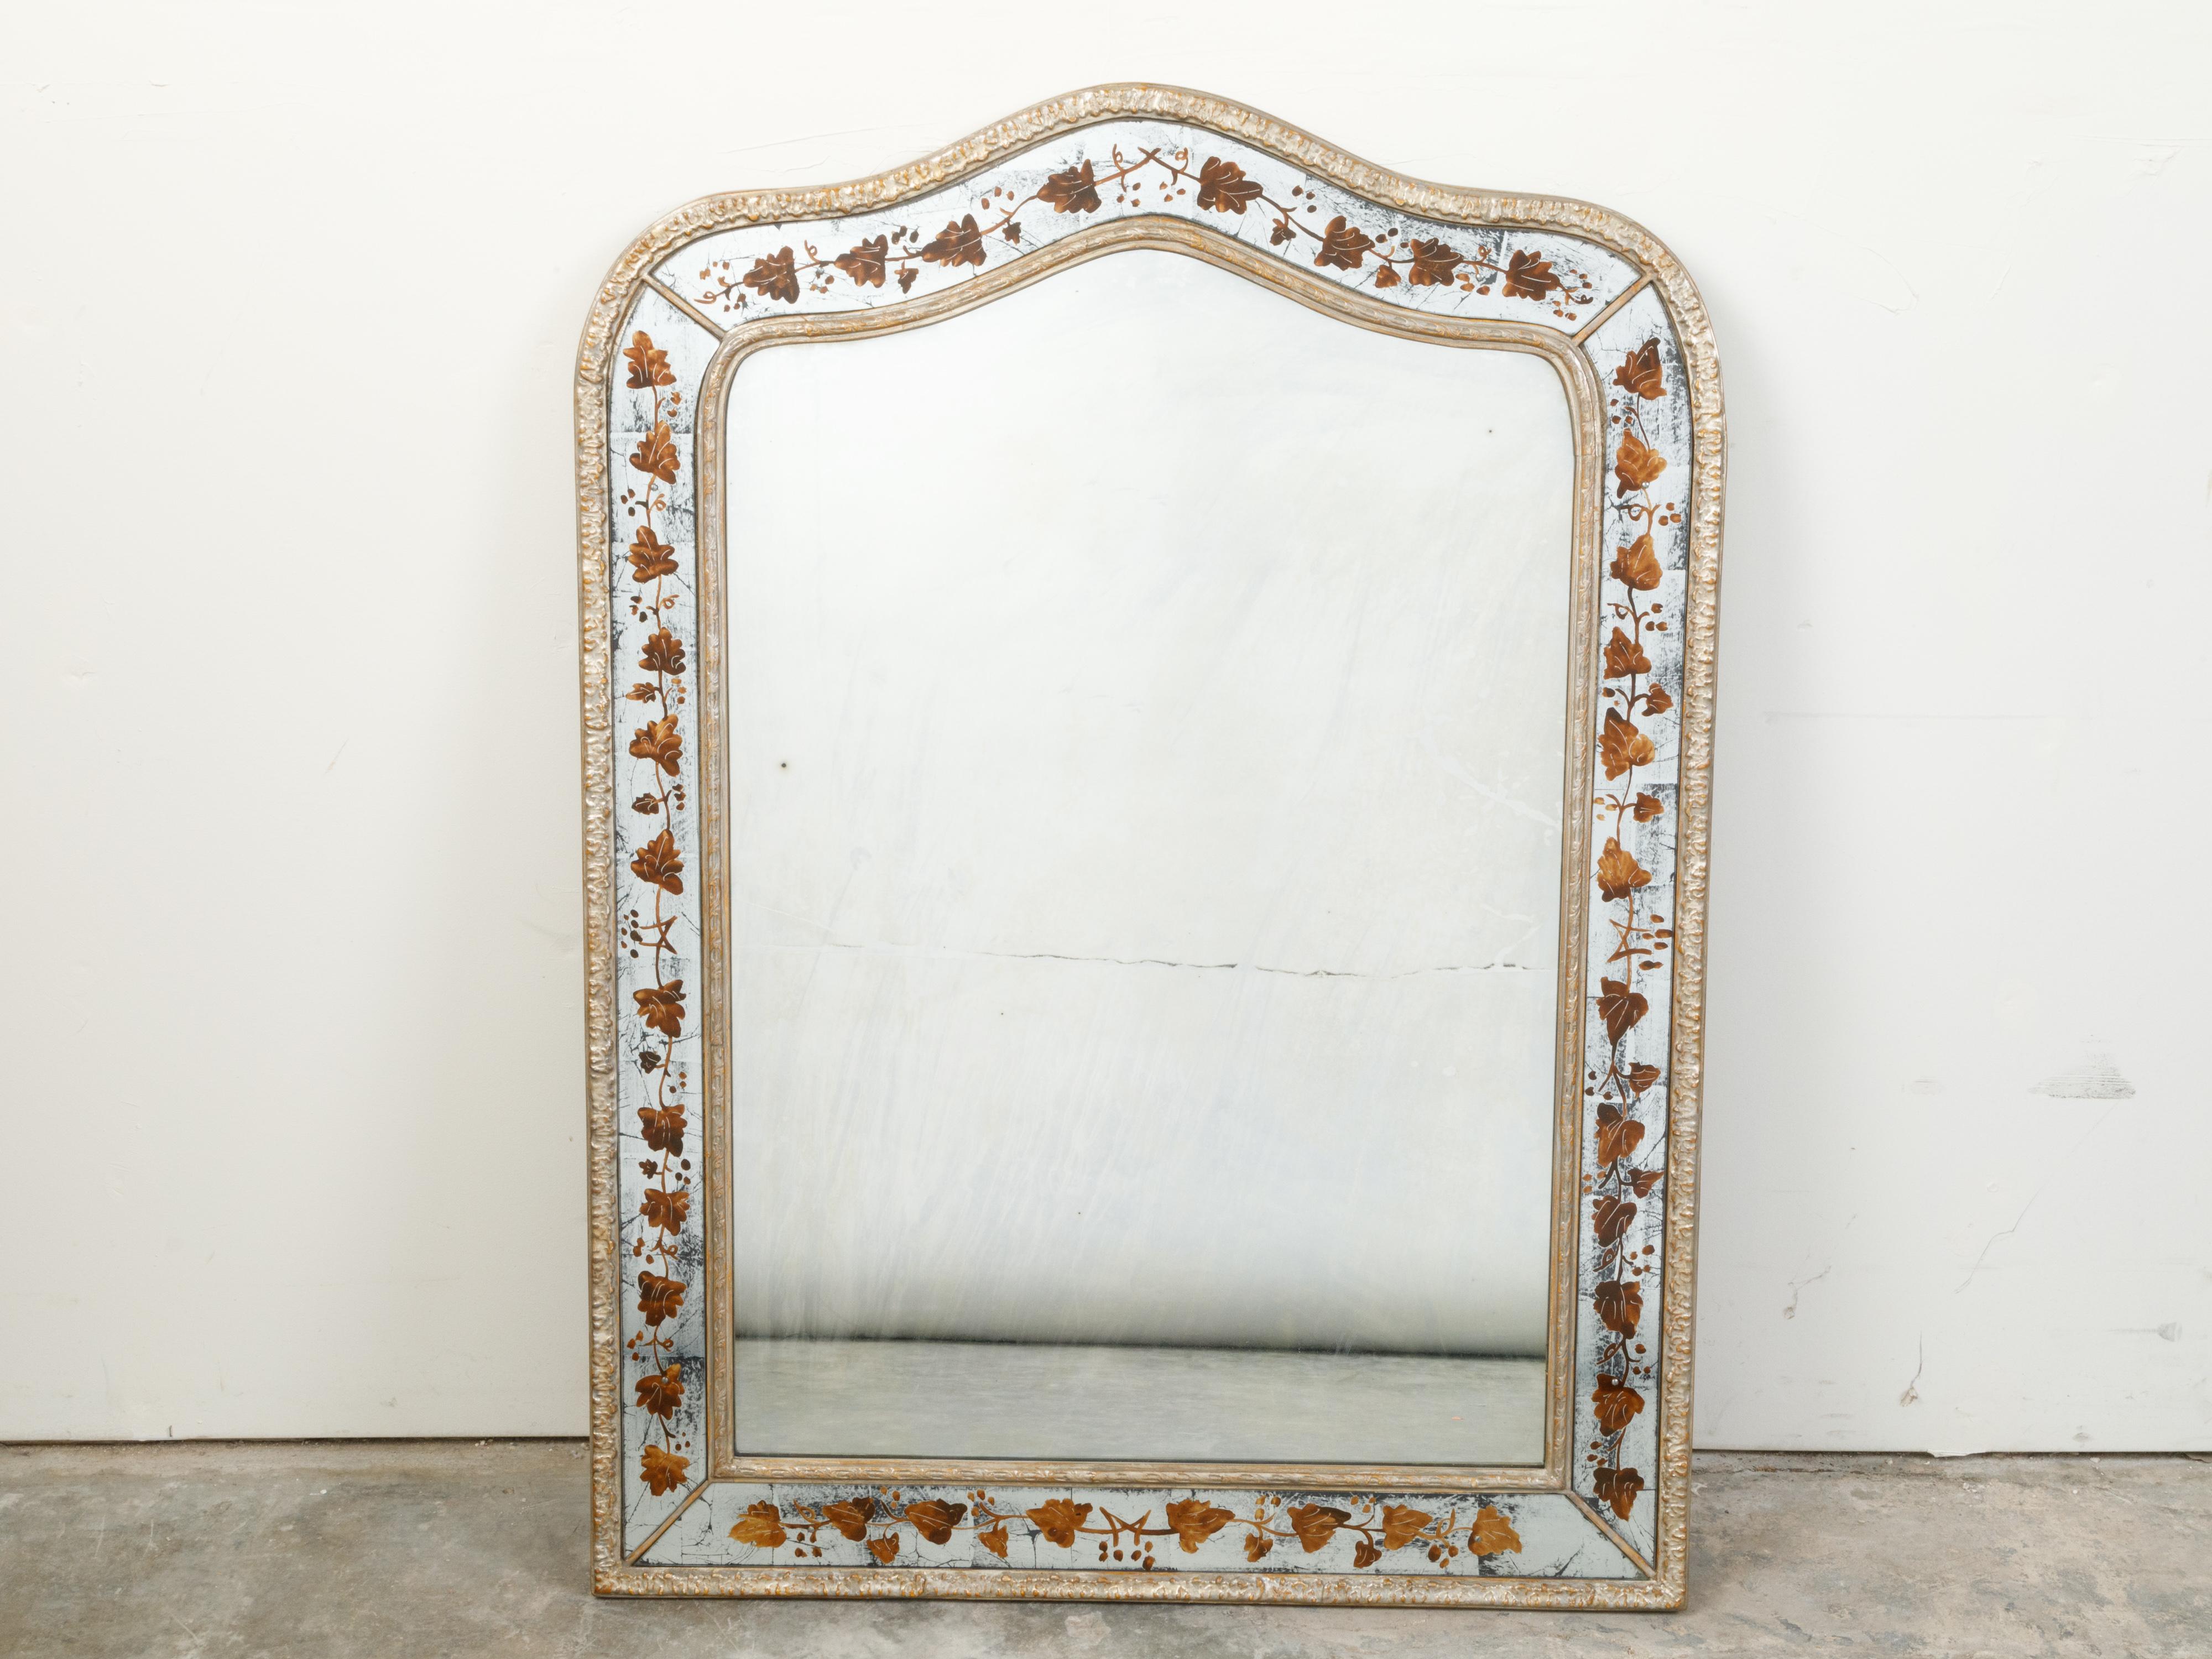 A French Maison Jansen mirror from the mid-20th century, with painted leaves décor. Created by Maison Jansen during the mid-century period, this mirror attracts our attention with its delicate foliage décor accenting a simple frame topped with a